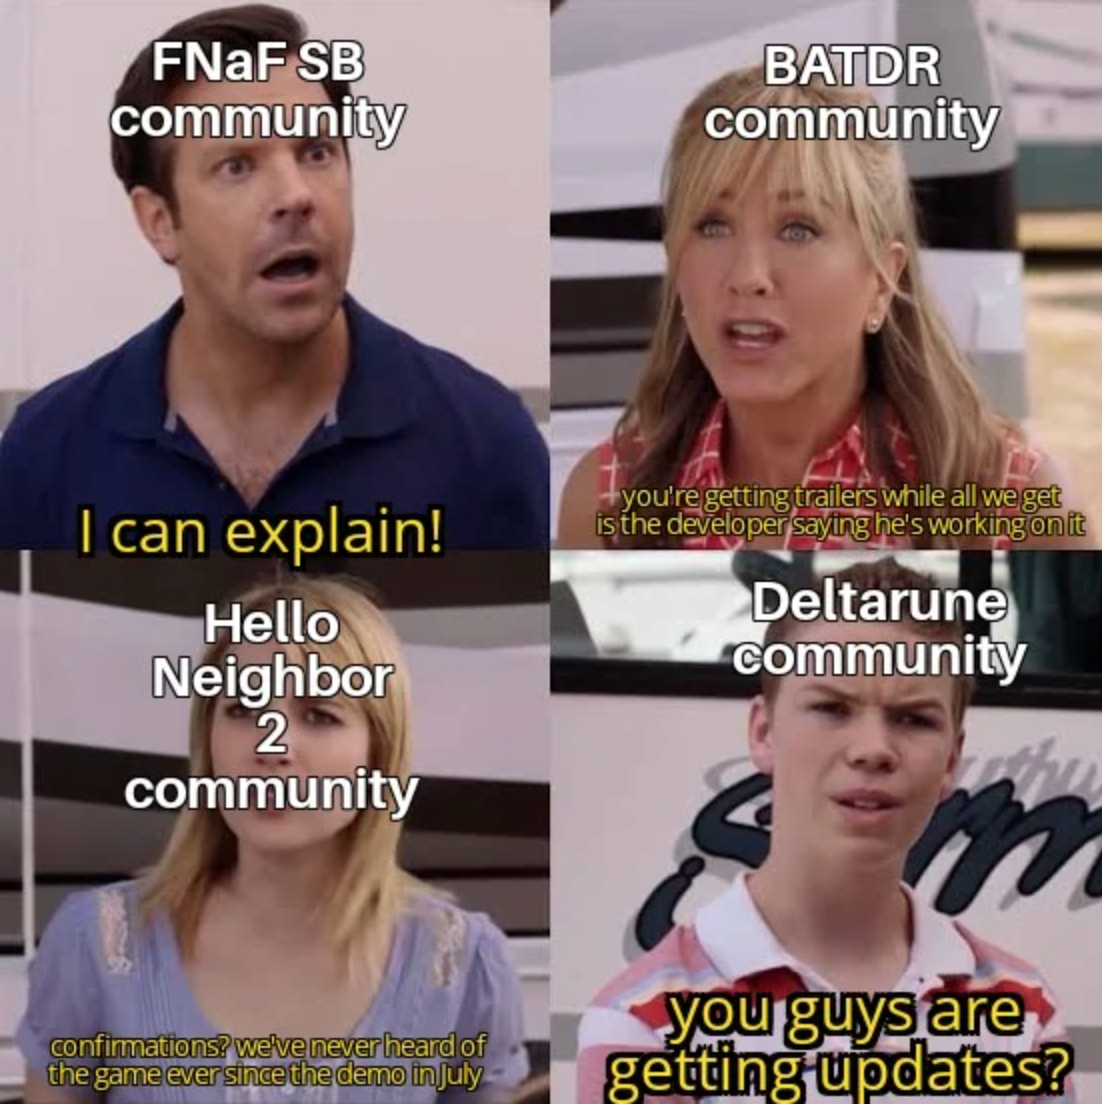 funny gaming memes - funny chef memes - FNaF Sb community Batdr community I can explain! Hello Neighbor 2 community you're getting trailers while all we get is the developer saying he's working one Deltarune community confirmations welve never heard of th